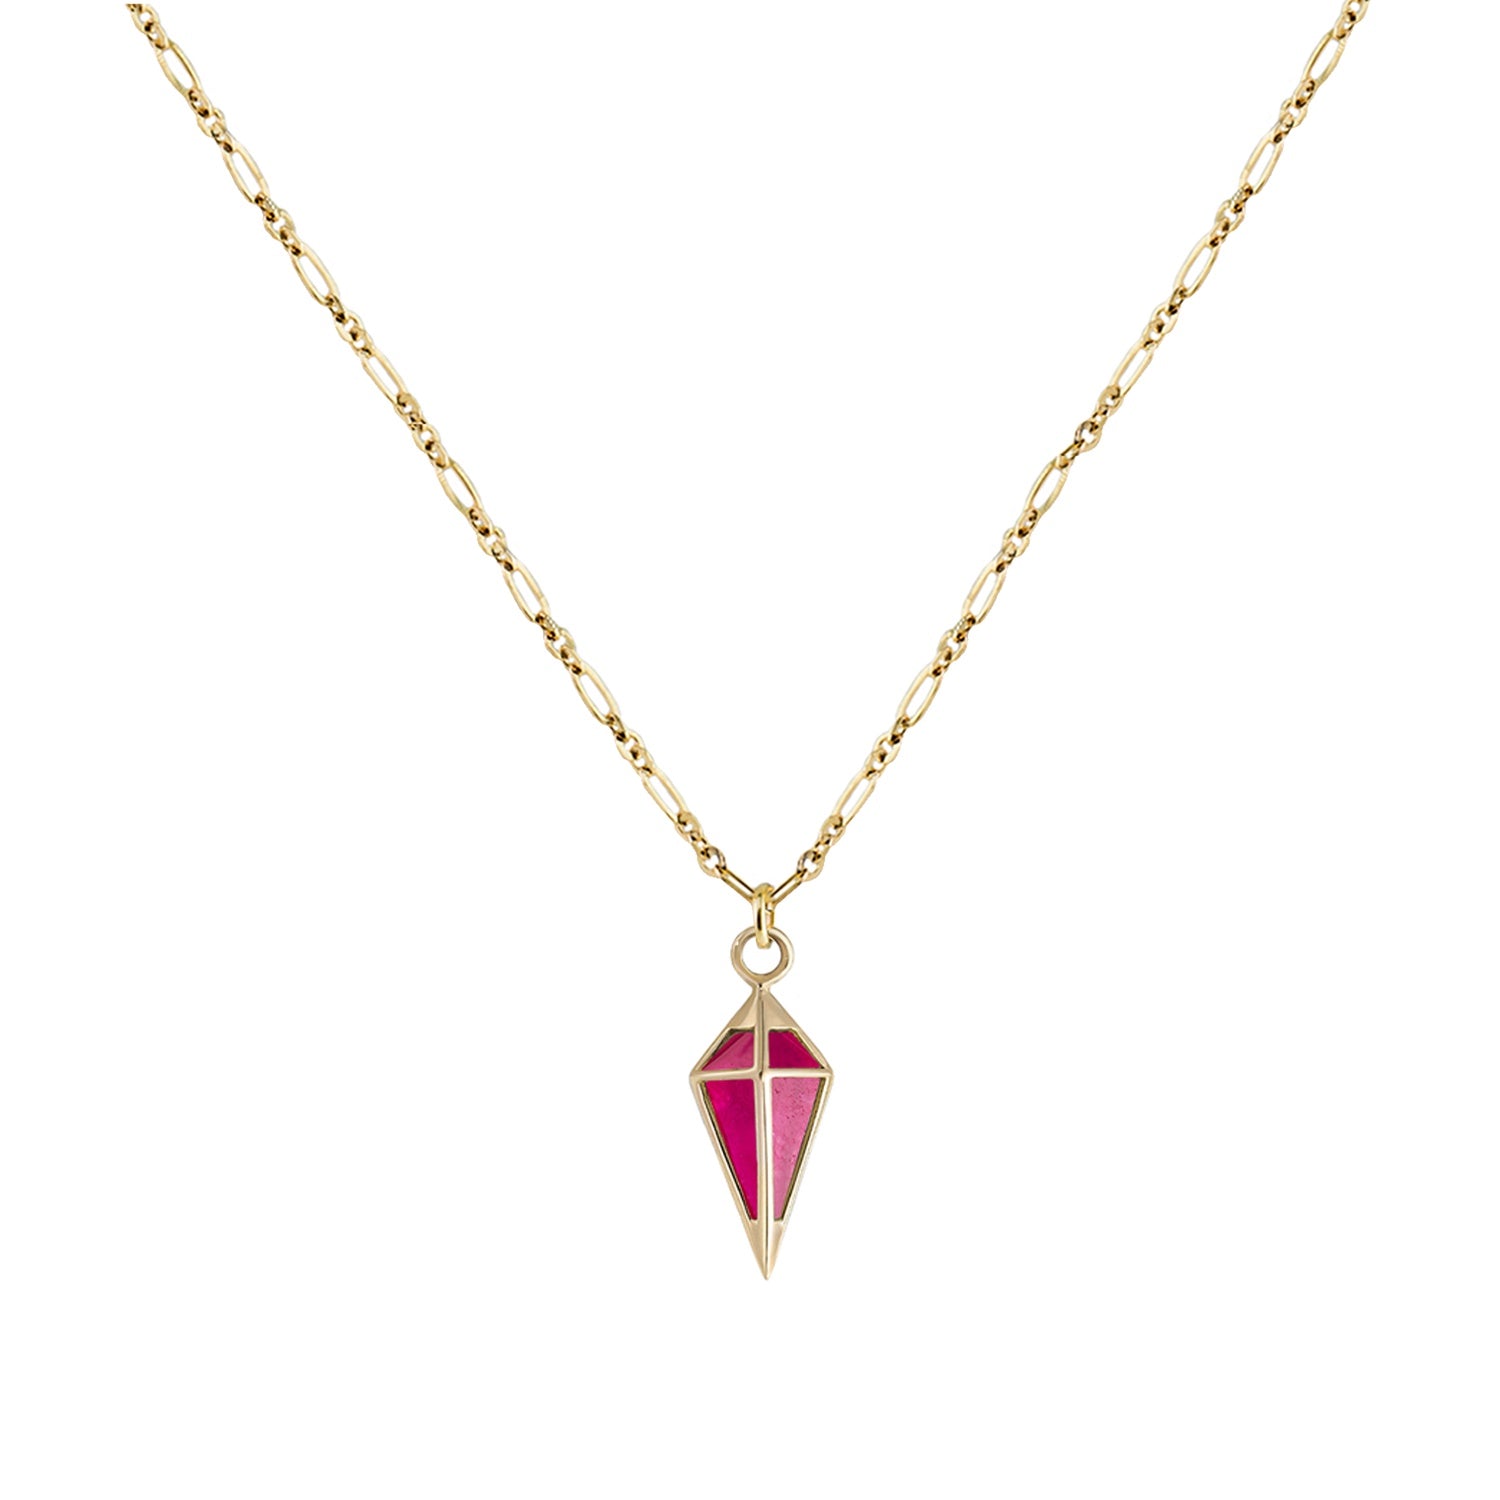 Métier by tomfoolery Roma Adjustable Chain Necklace with Ruby Quartz Short Point Pendulum Plaque